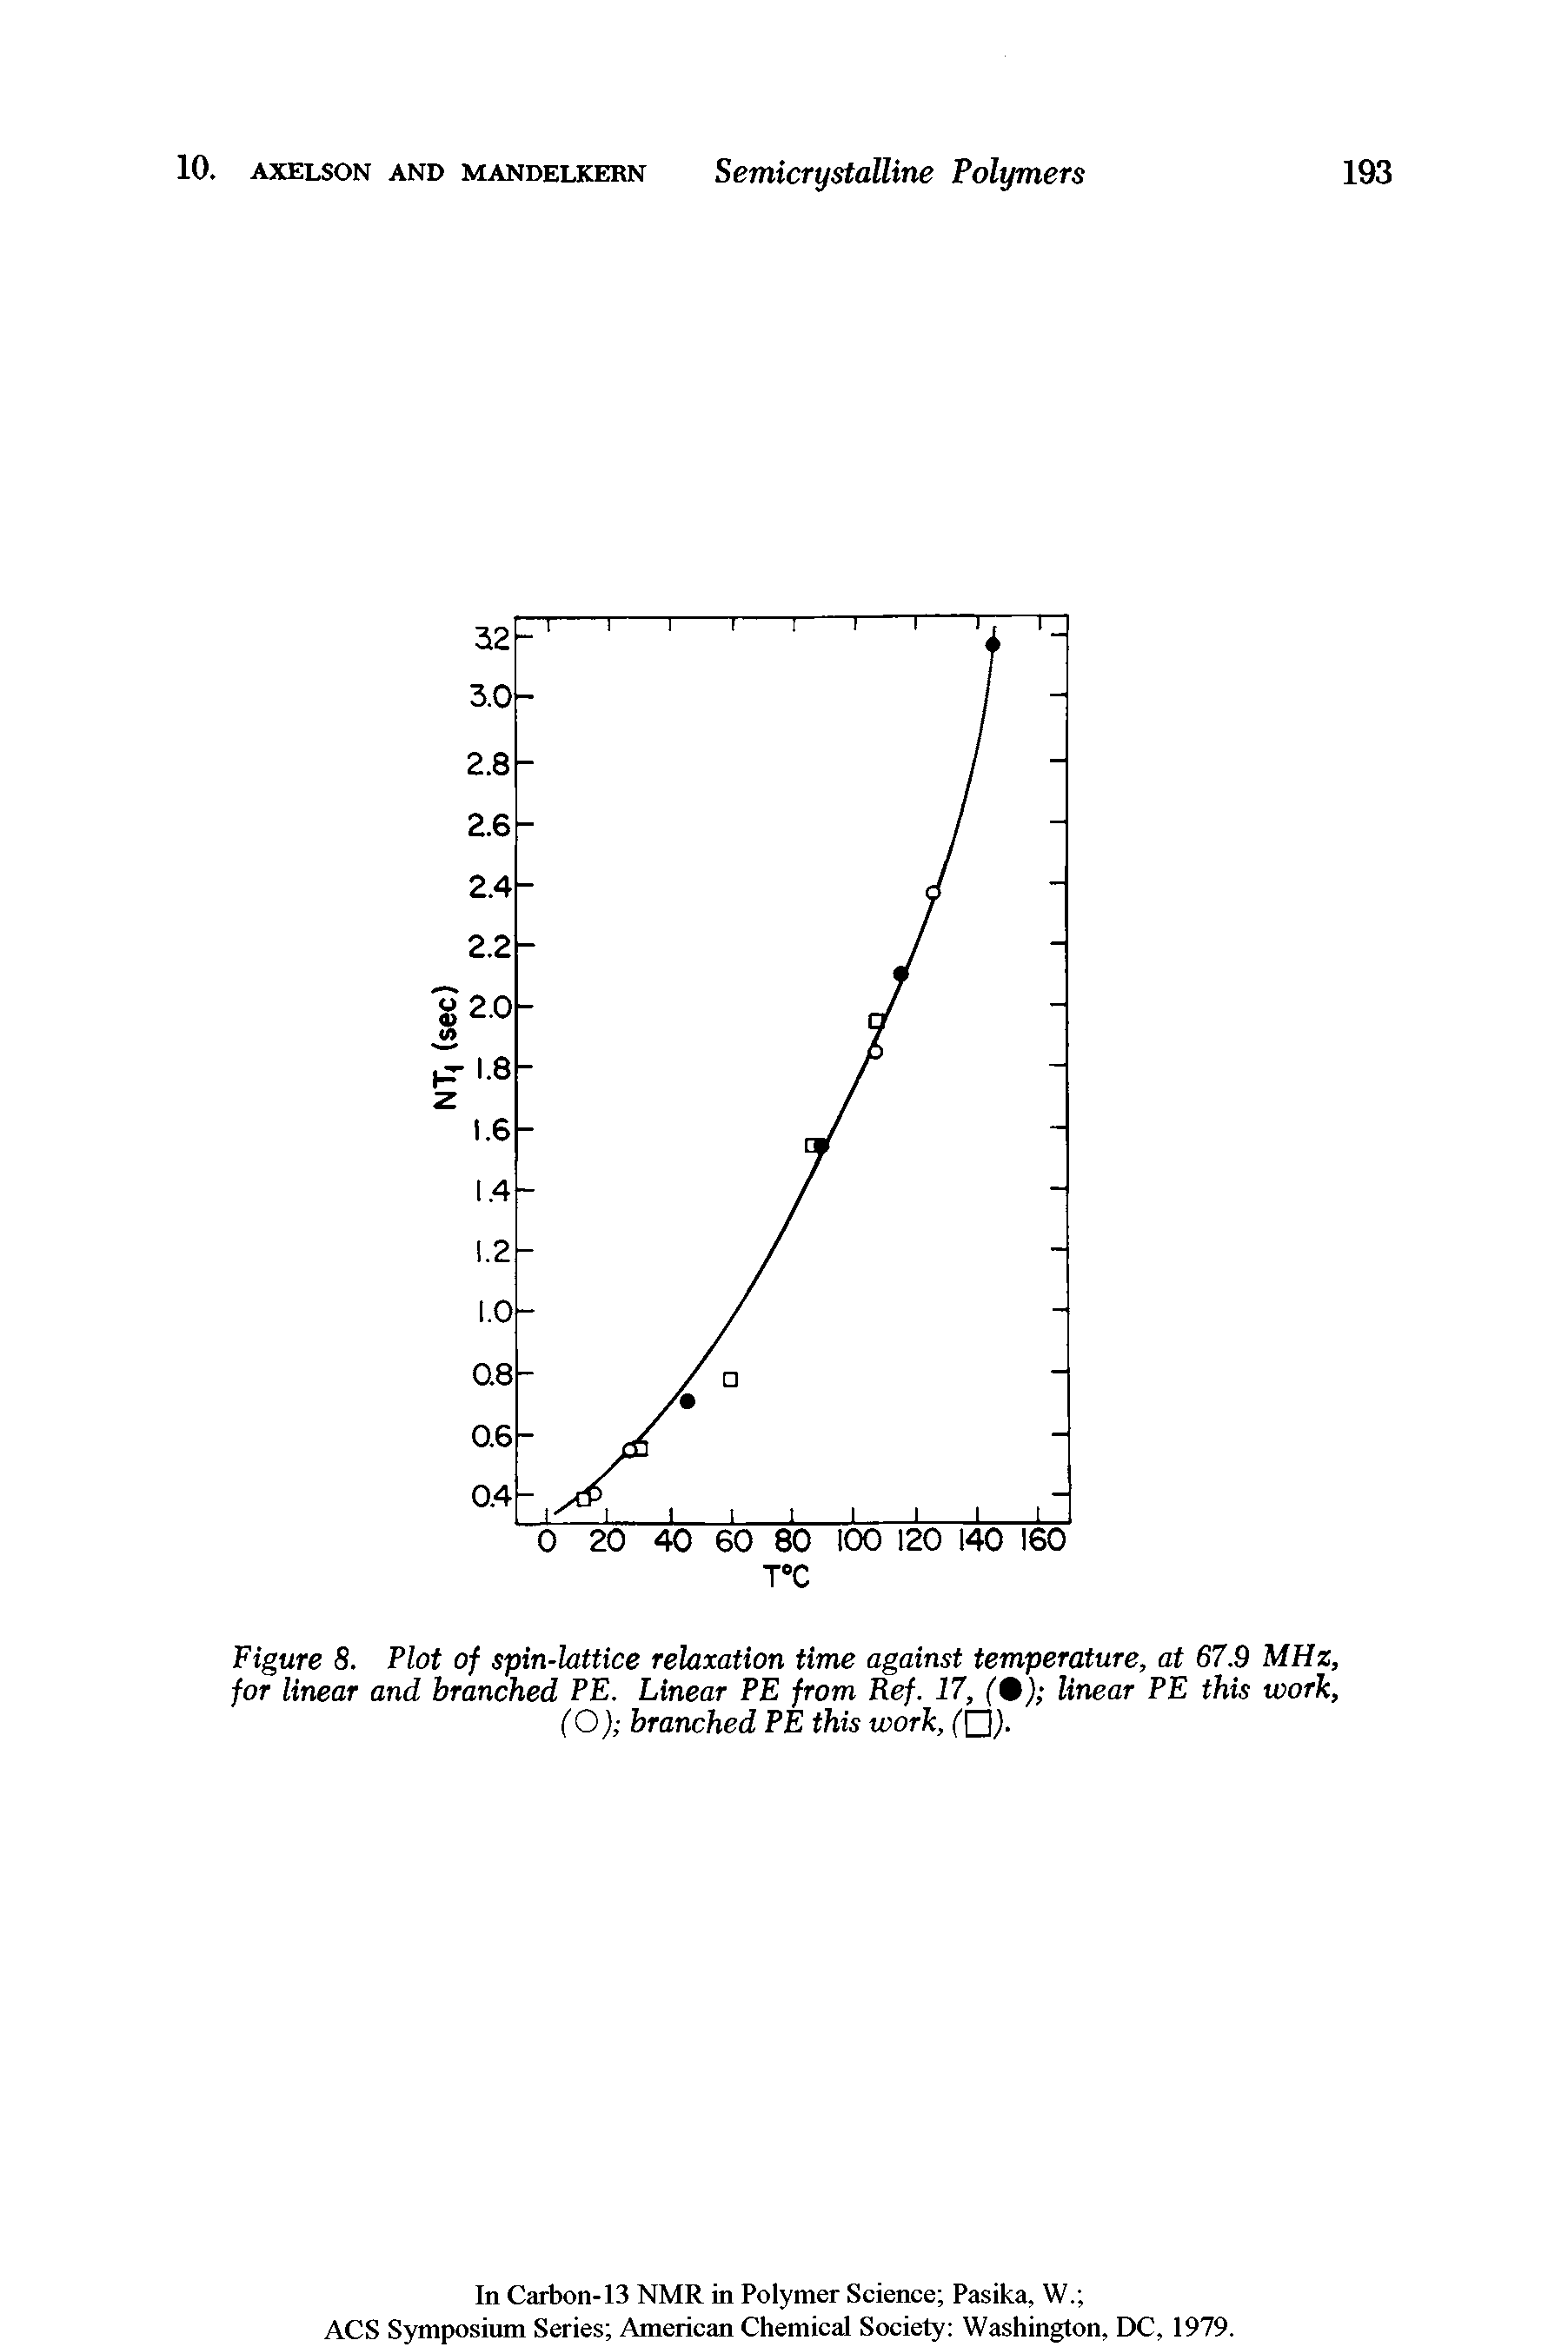 Figure 8. Plot of spin-lattice relaxation time against temperature, at 67.9 MHz, for linear and branched PE. Linear PE from Ref. 17, (%) linear PE this work, ( O ) branched PE this work, ( j.